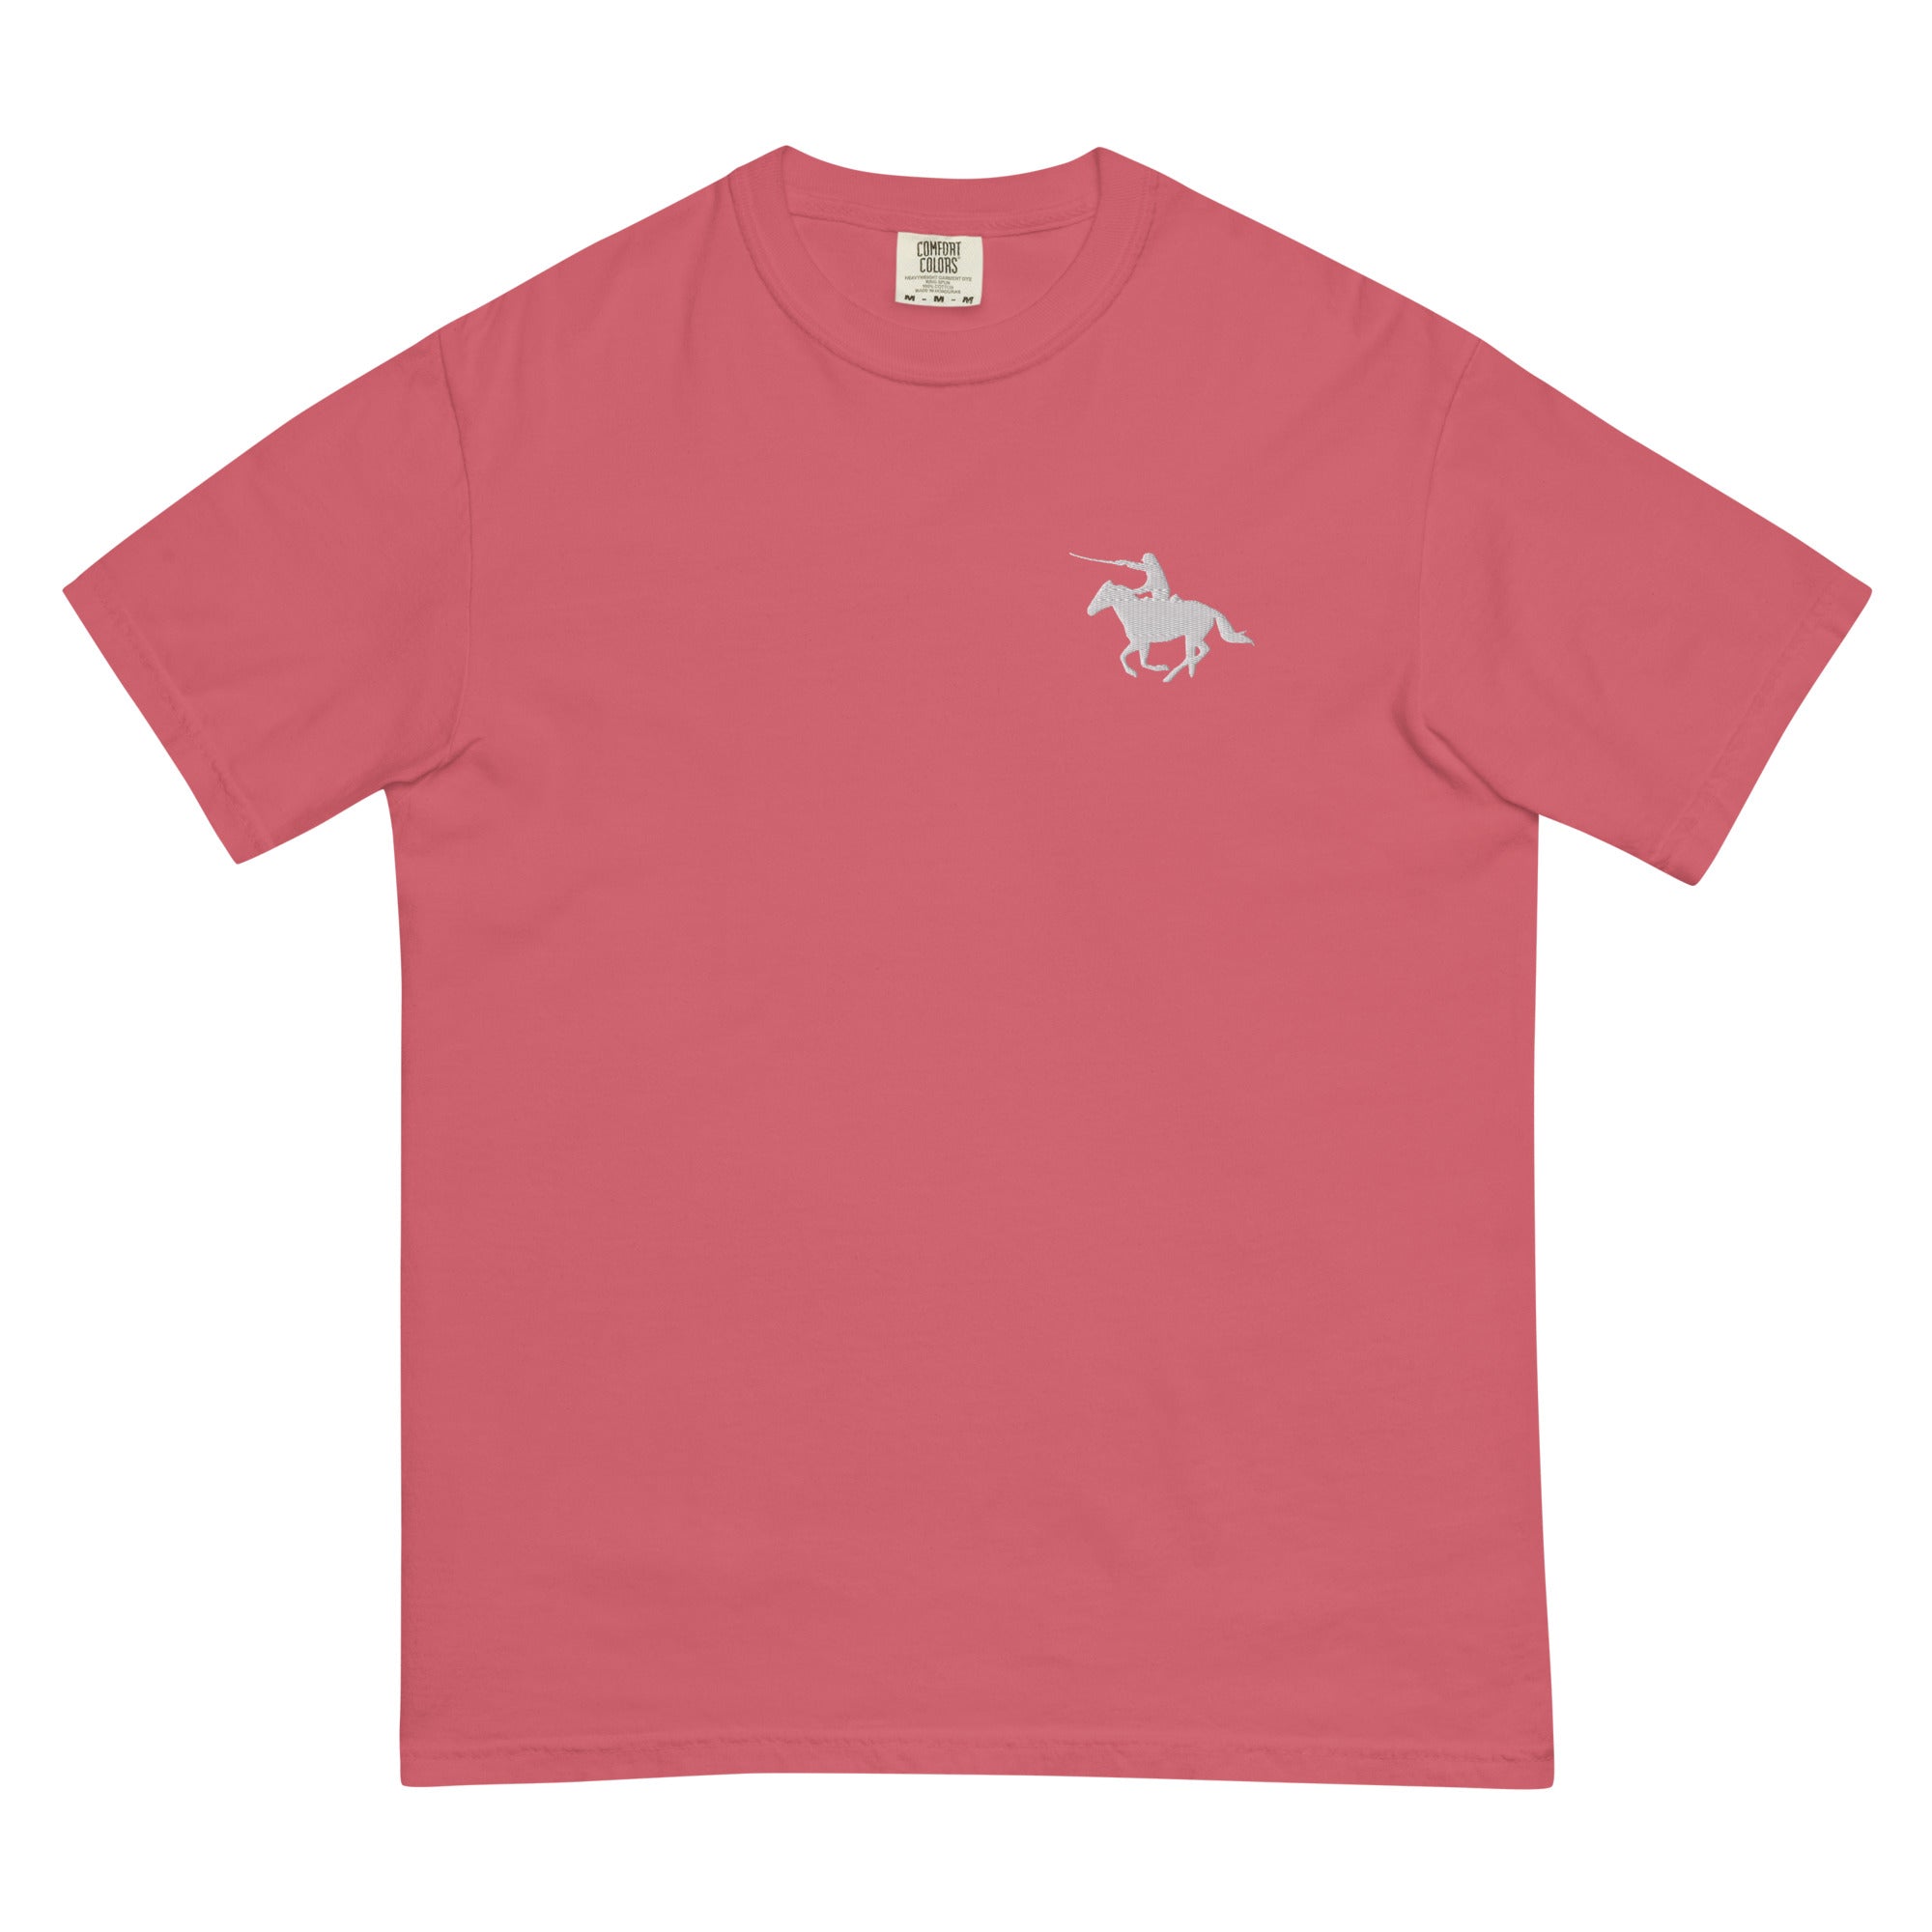 Cavalry Charge Men’s garment-dyed heavyweight t-shirt